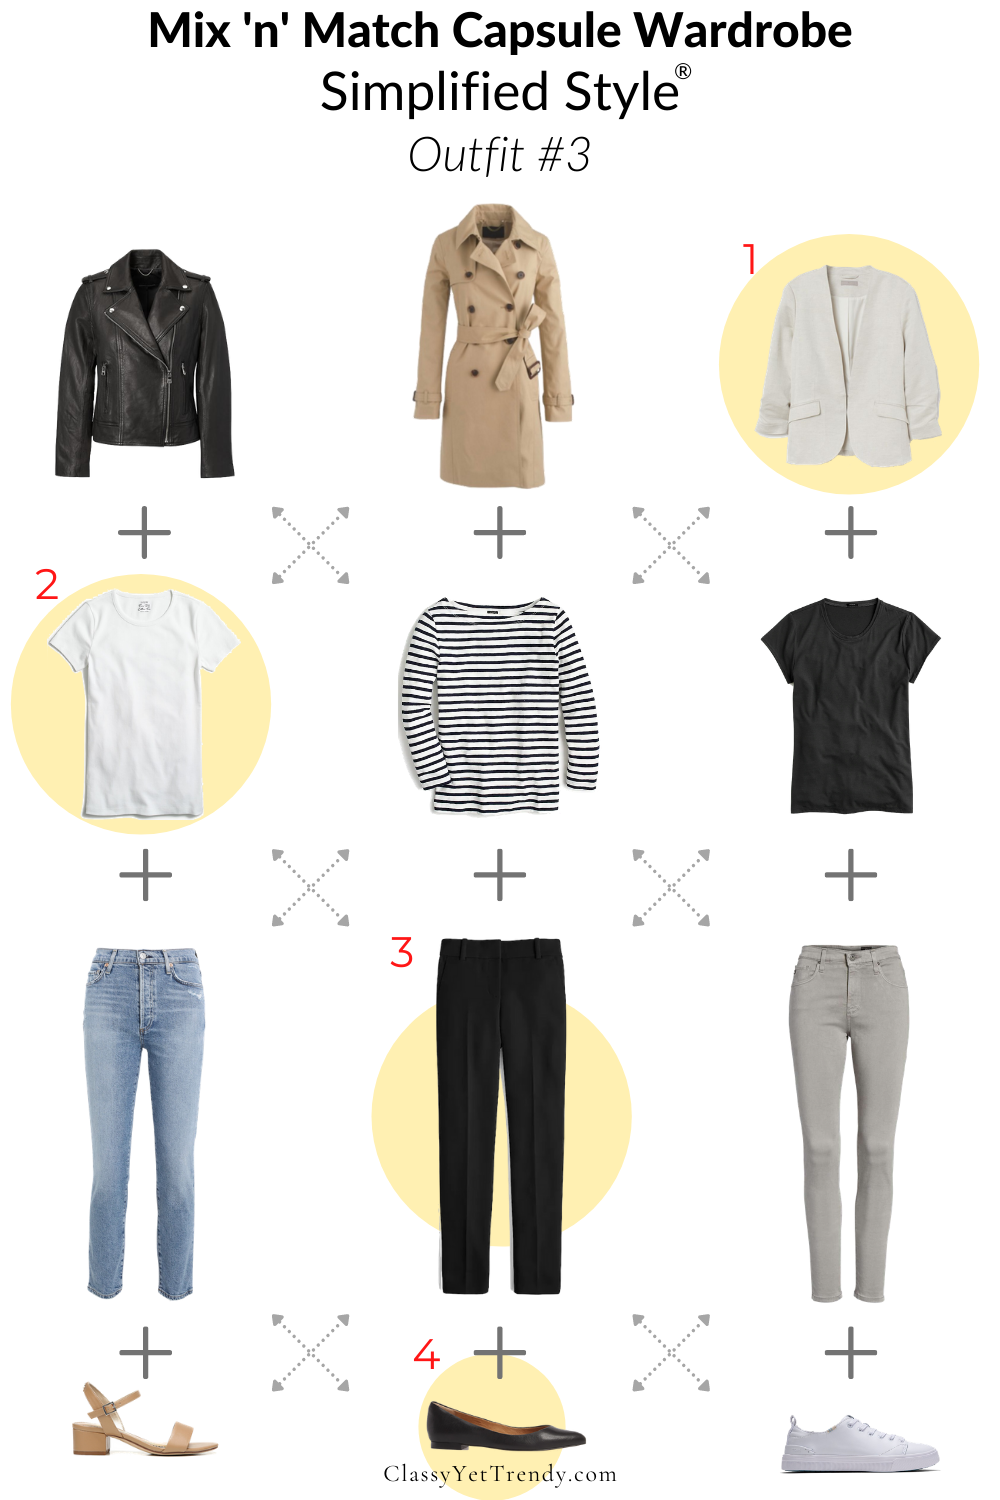 Plus Size Capsule Wardrobe  Your Guide to Plus Size Fall Fashion